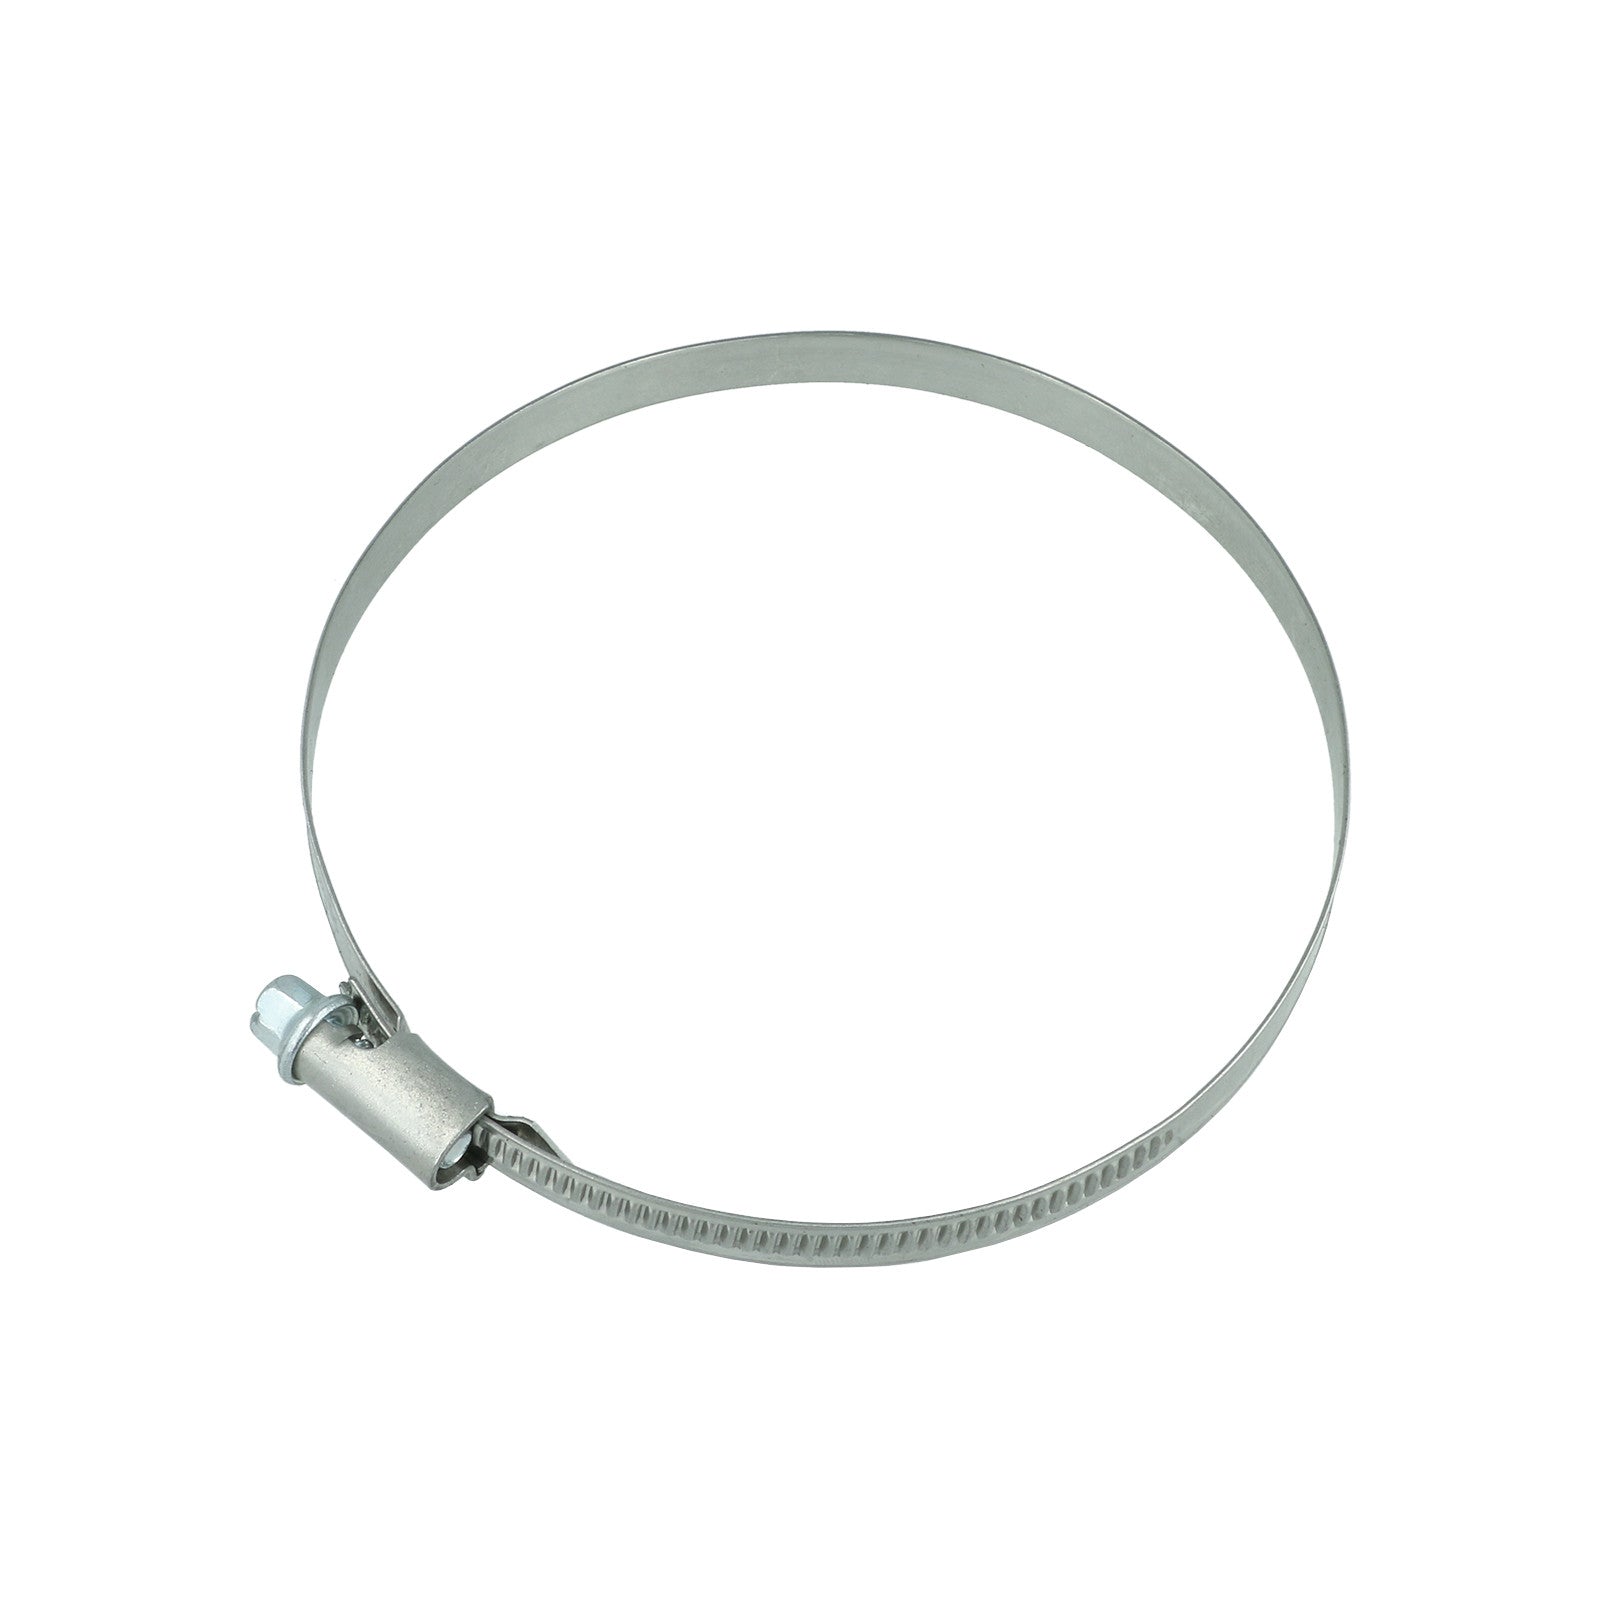 BOOST Products 1/2" Hose Clamp - Stainless Steel Range